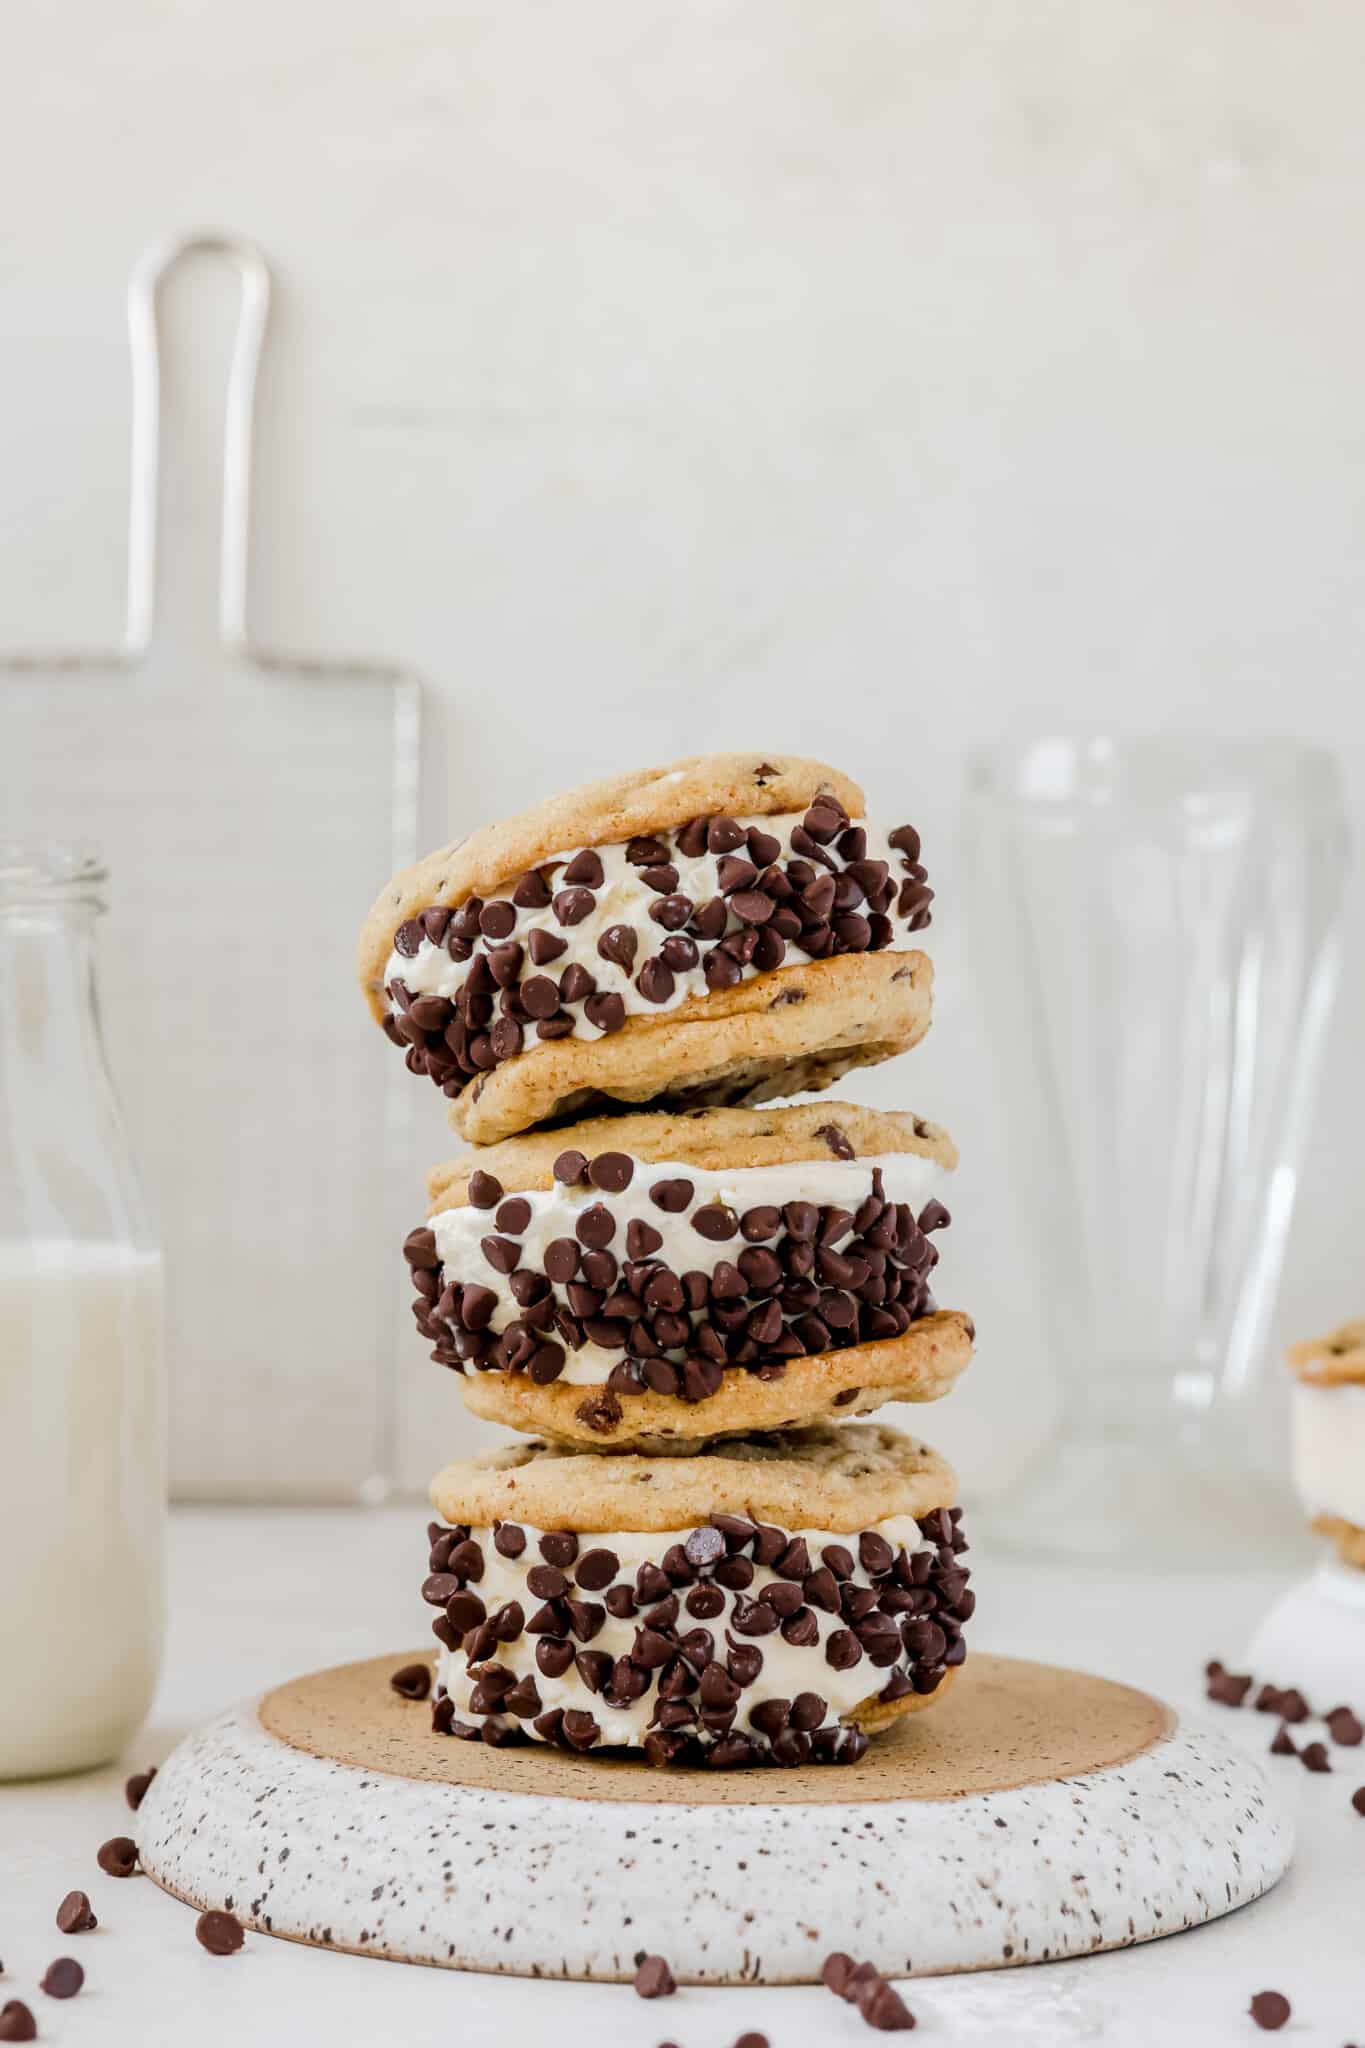 Forget the cookies, make ice cream sandwiches with bread instead